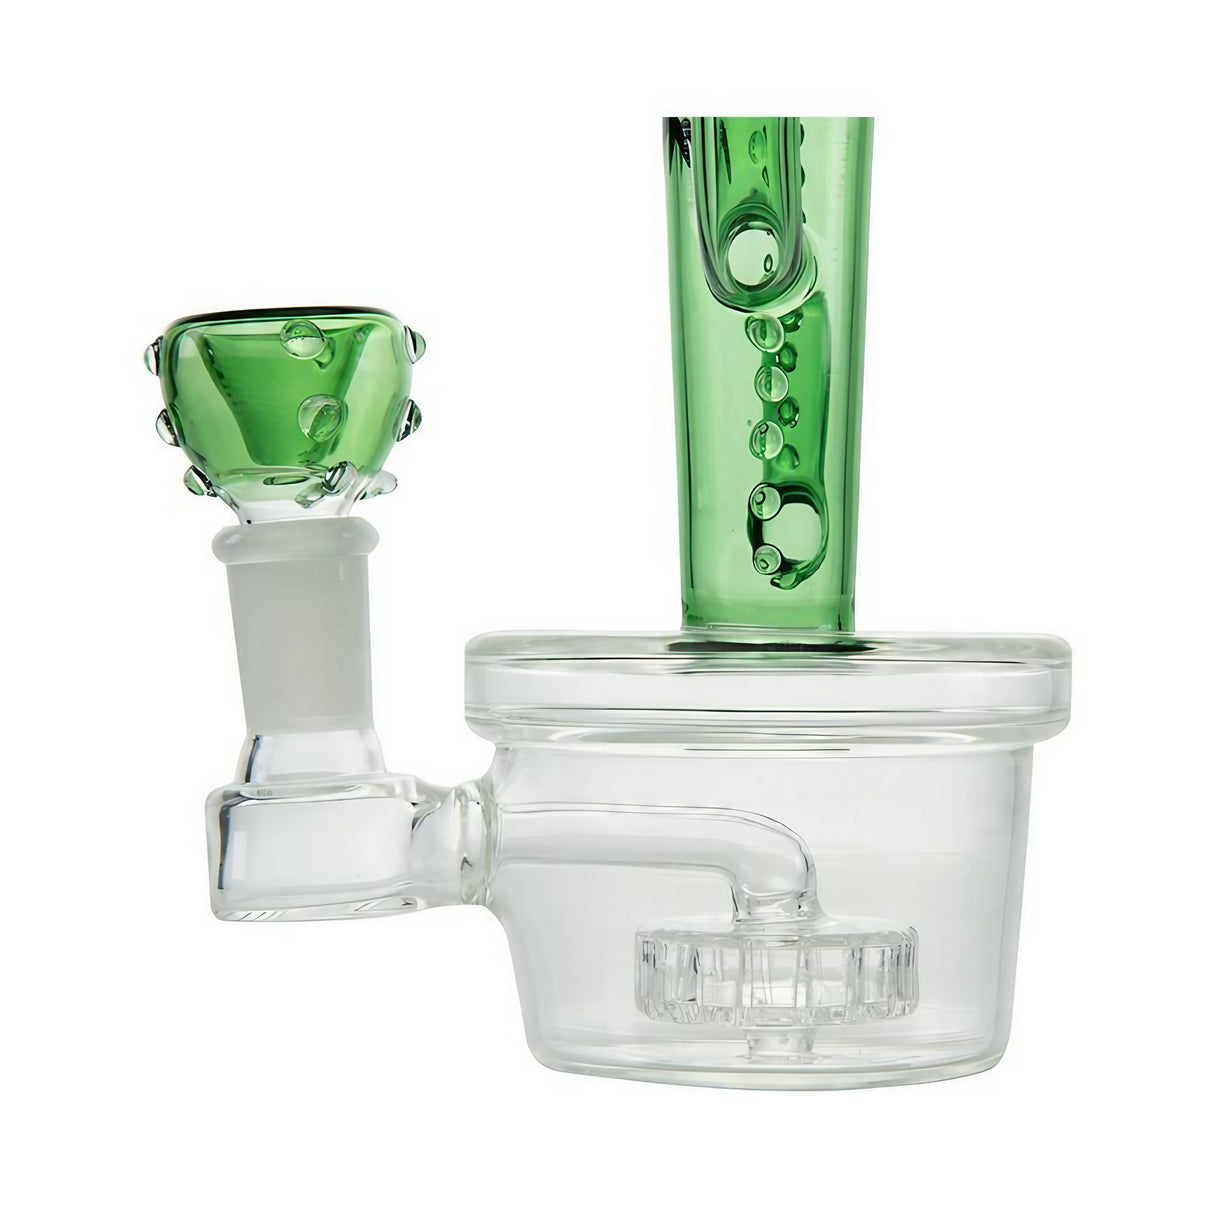 Hemper Cactus Jack Bong in green with disc and showerhead percolators, 7" height, 14mm joint